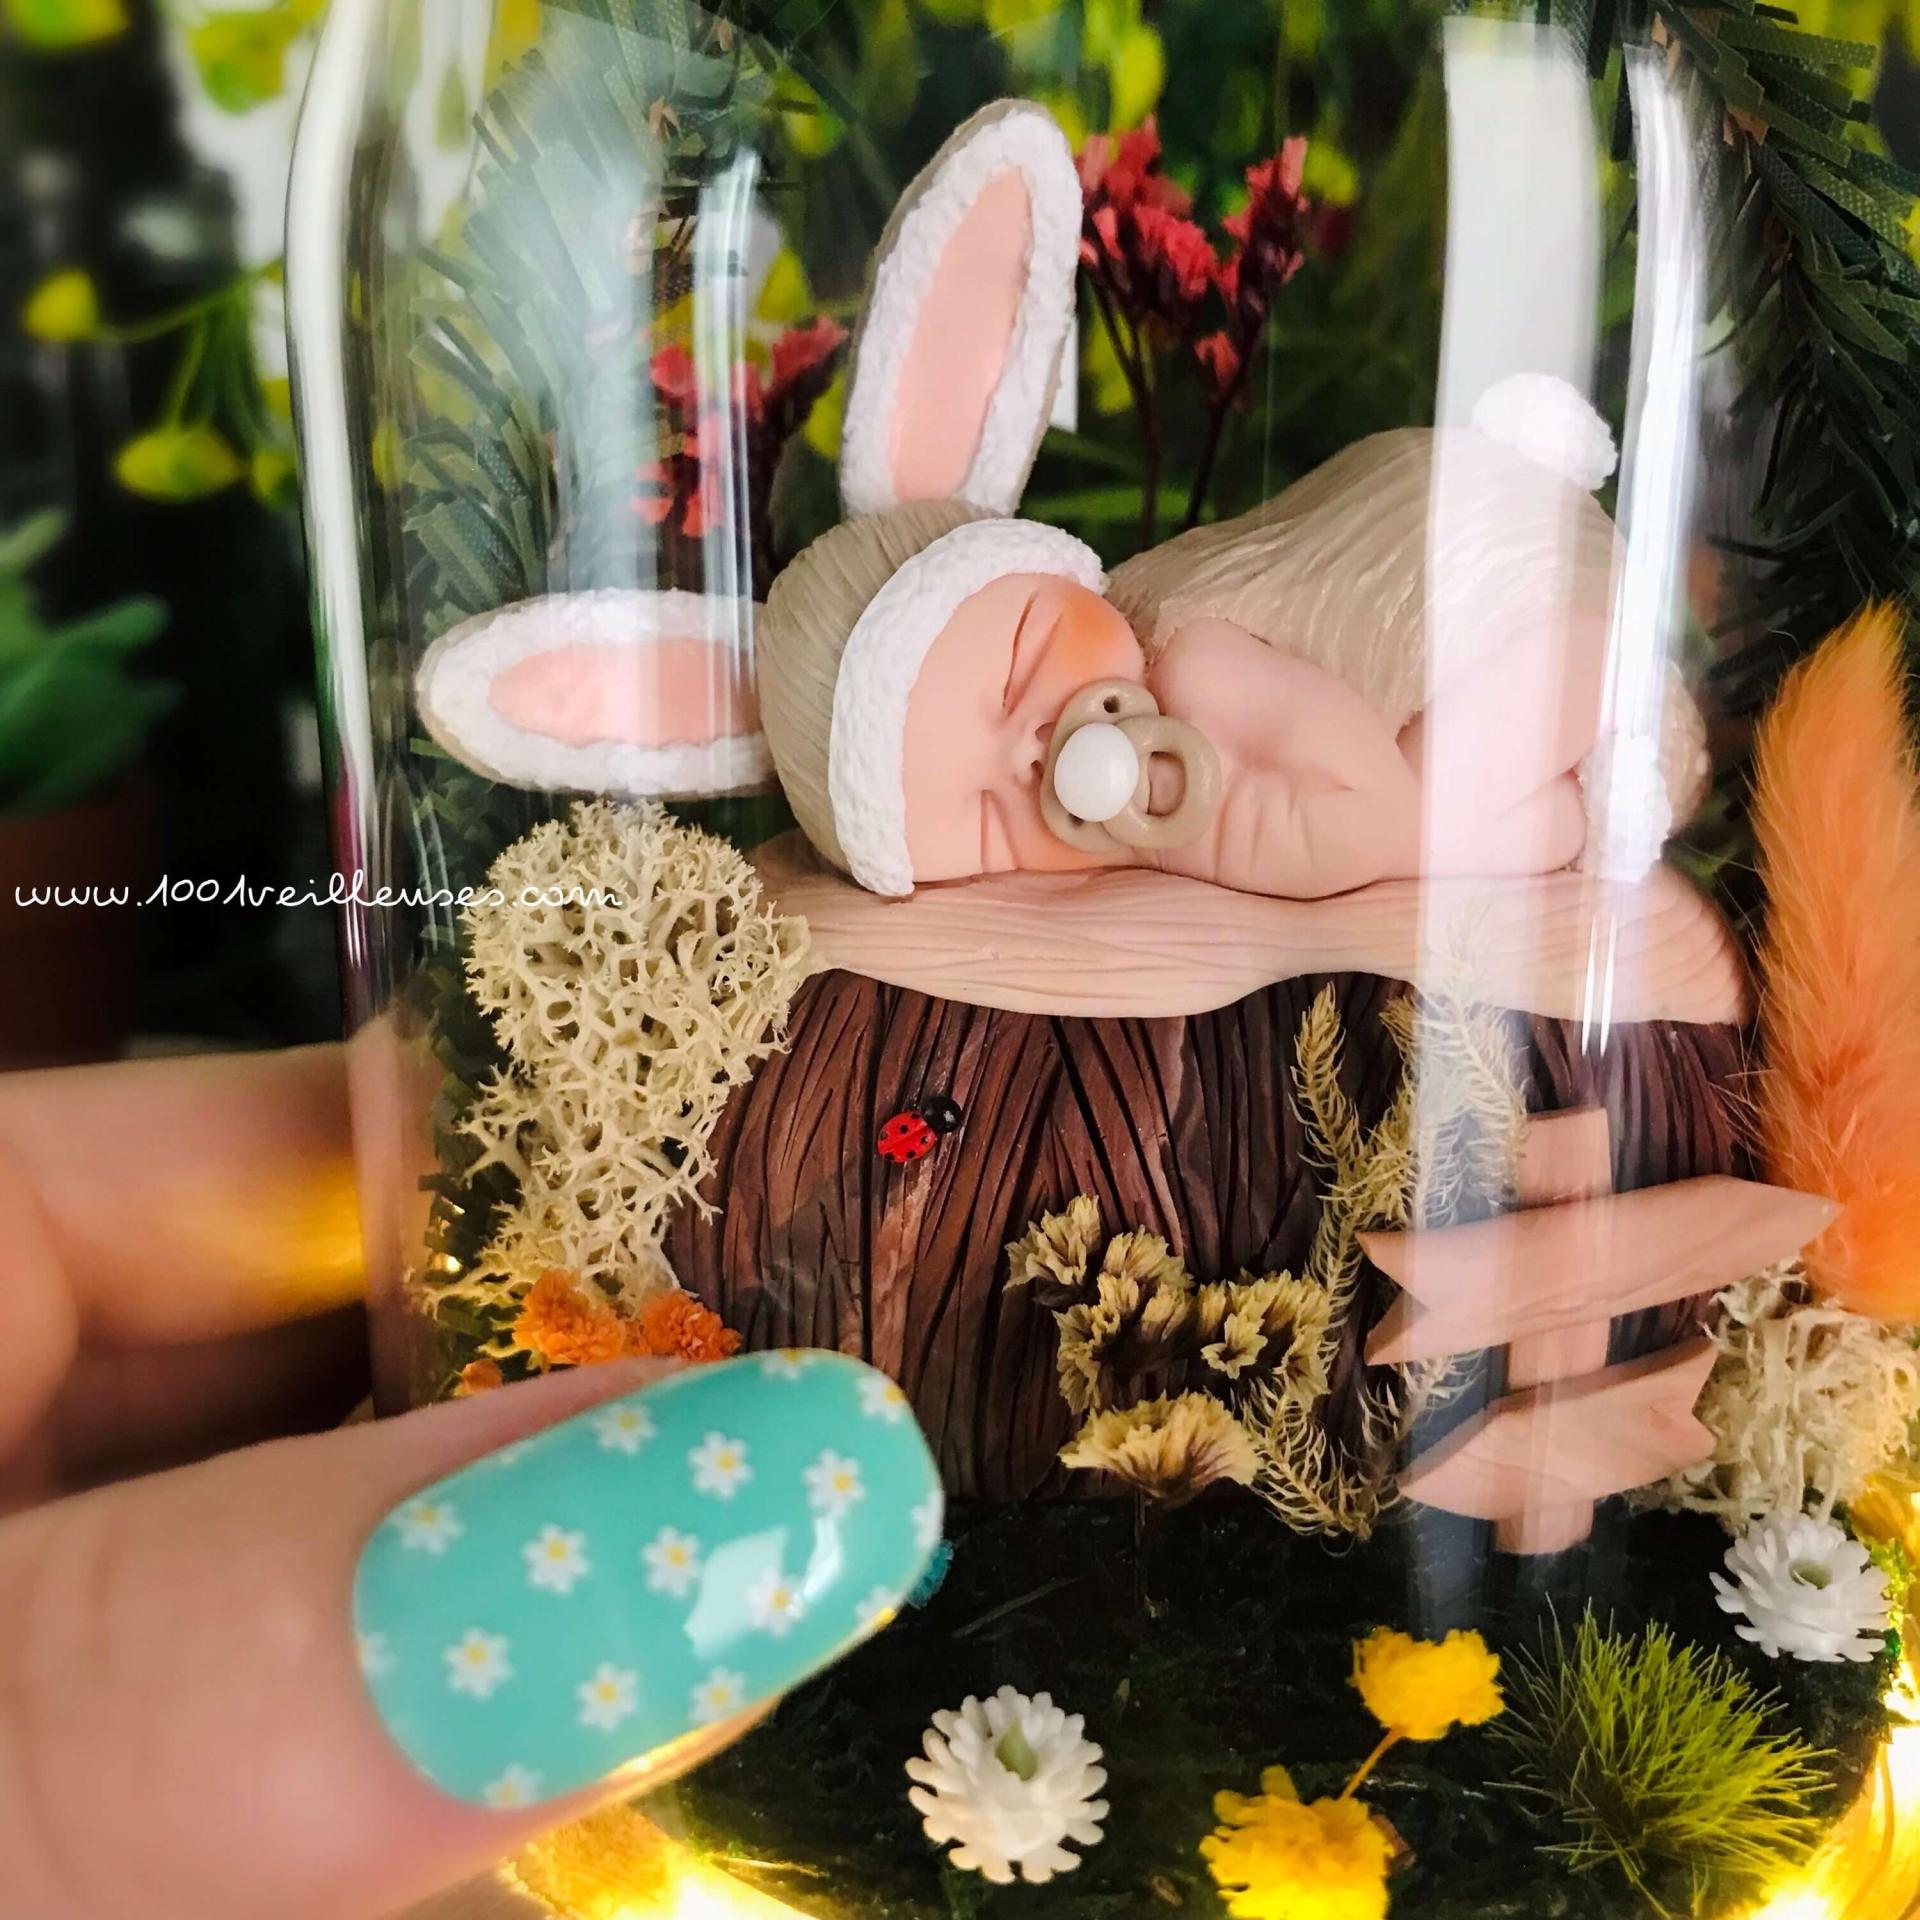 Small baby rabbit sleeping sculpted in fimo inside its glass bell, close-up view